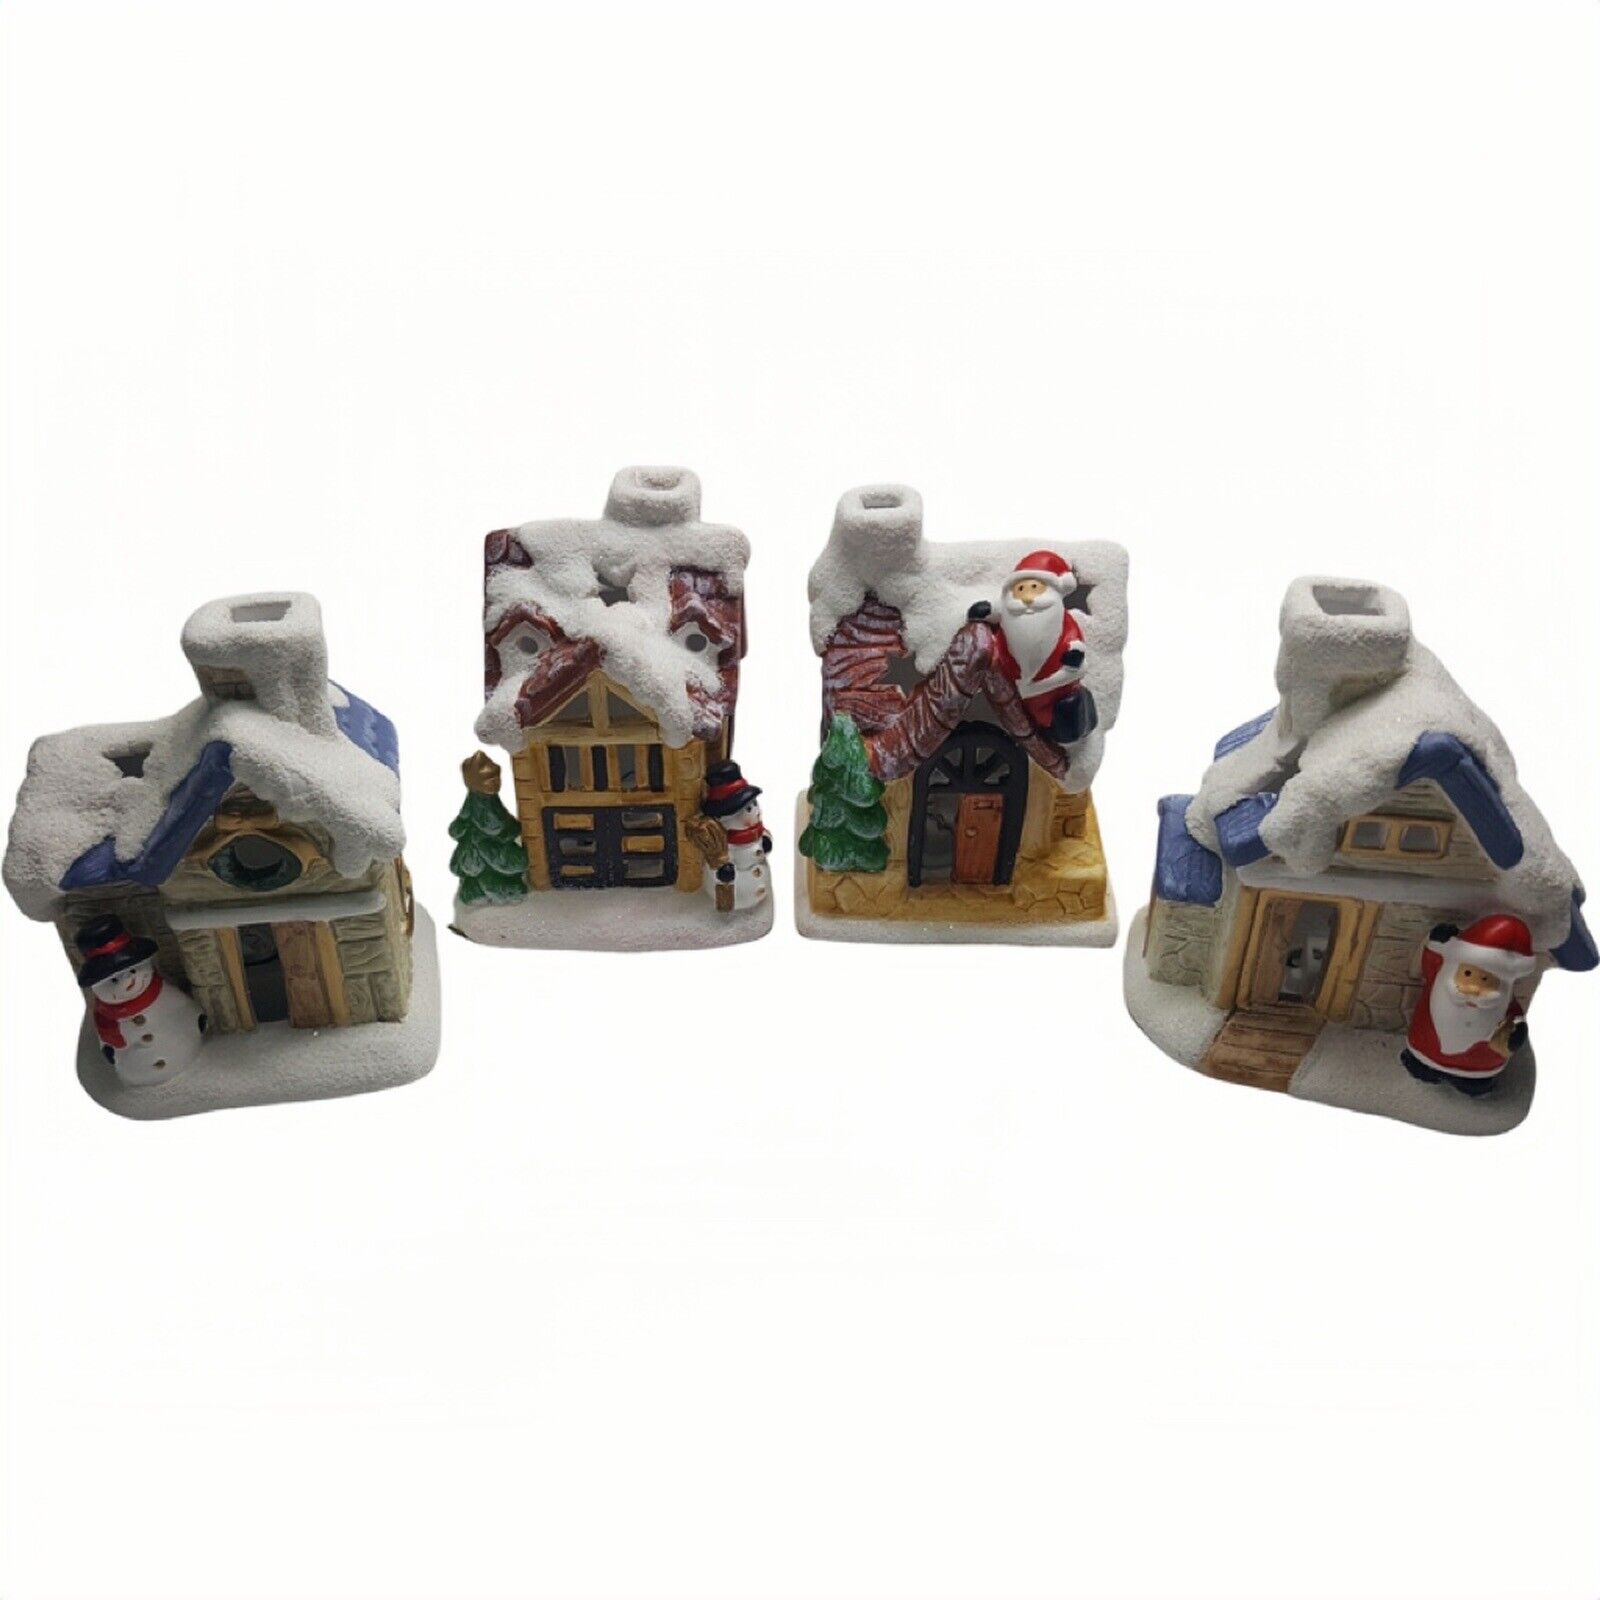 Set of 4 Lighted Ceramic Gingerbread  House Decor Christmas Ornaments  Gifts